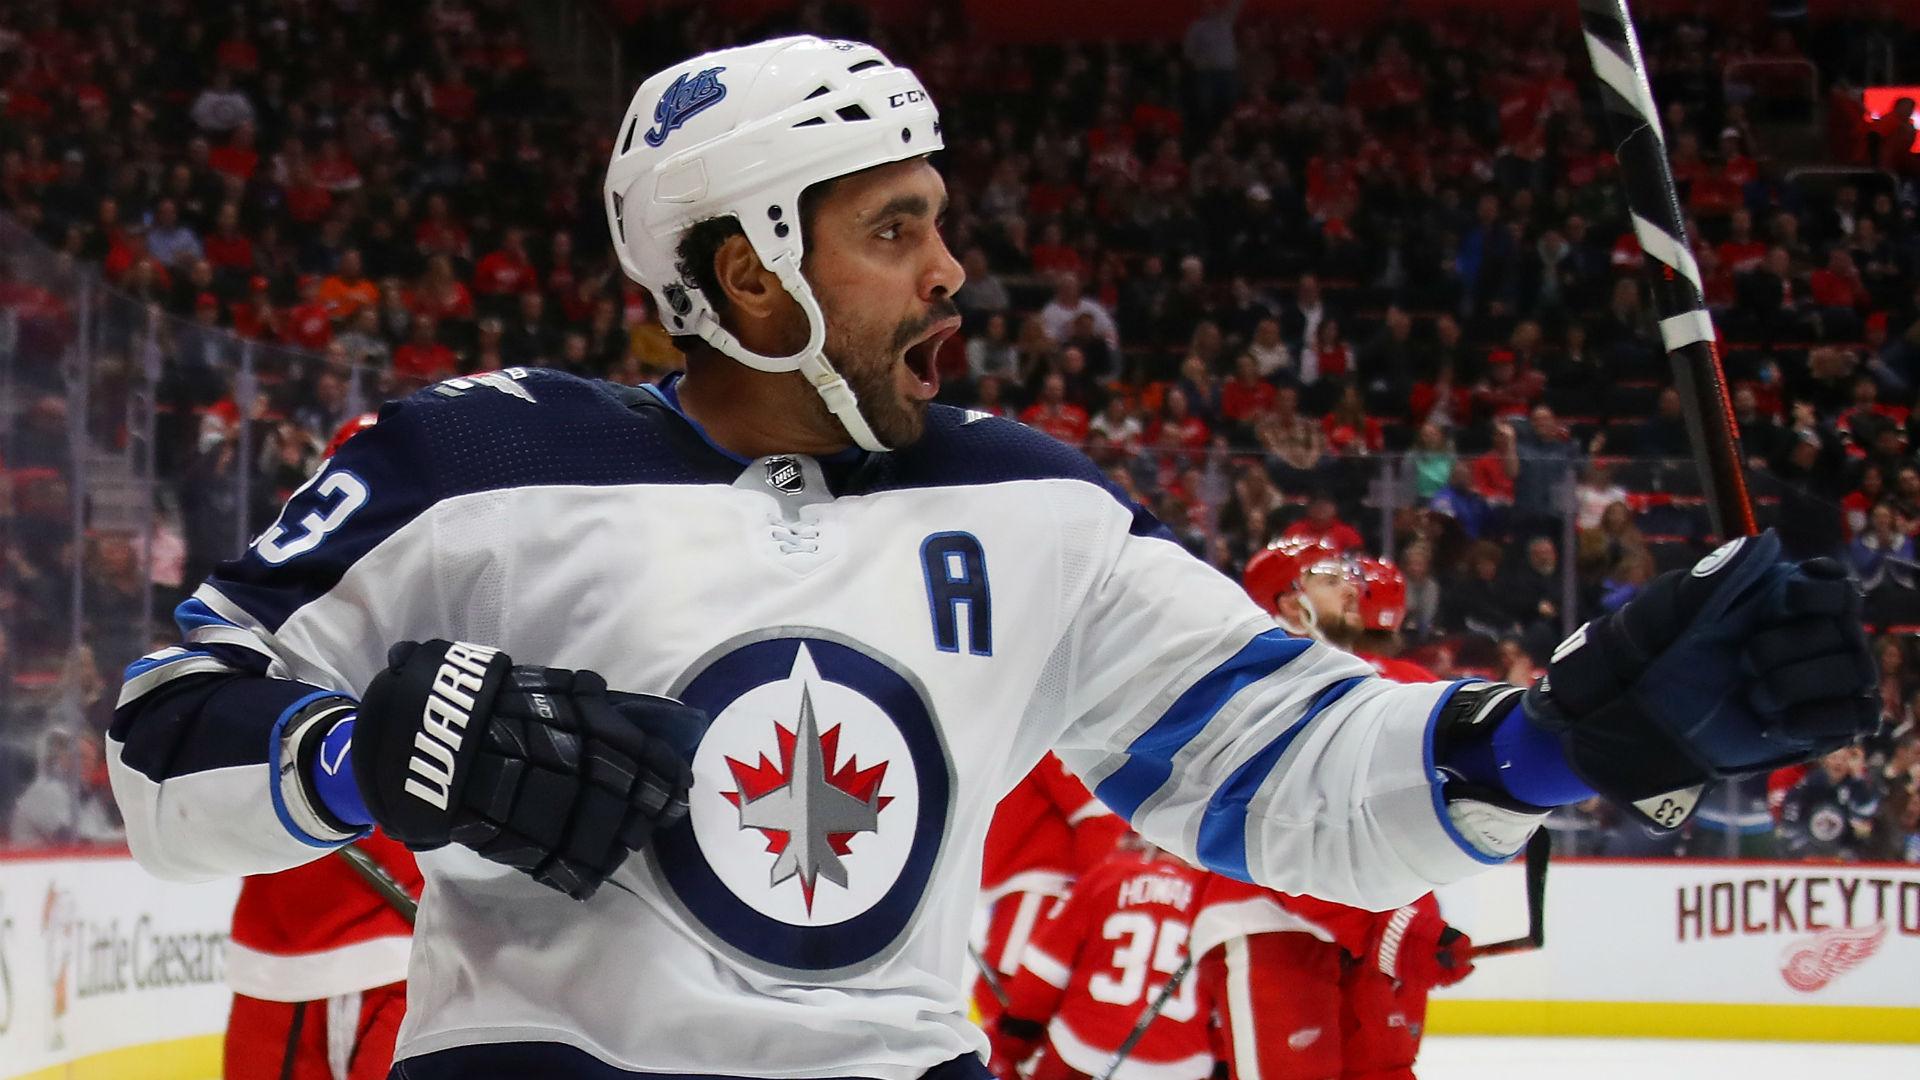 Dustin Byfuglien returns to Jets' lineup, plays almost 30 minutes